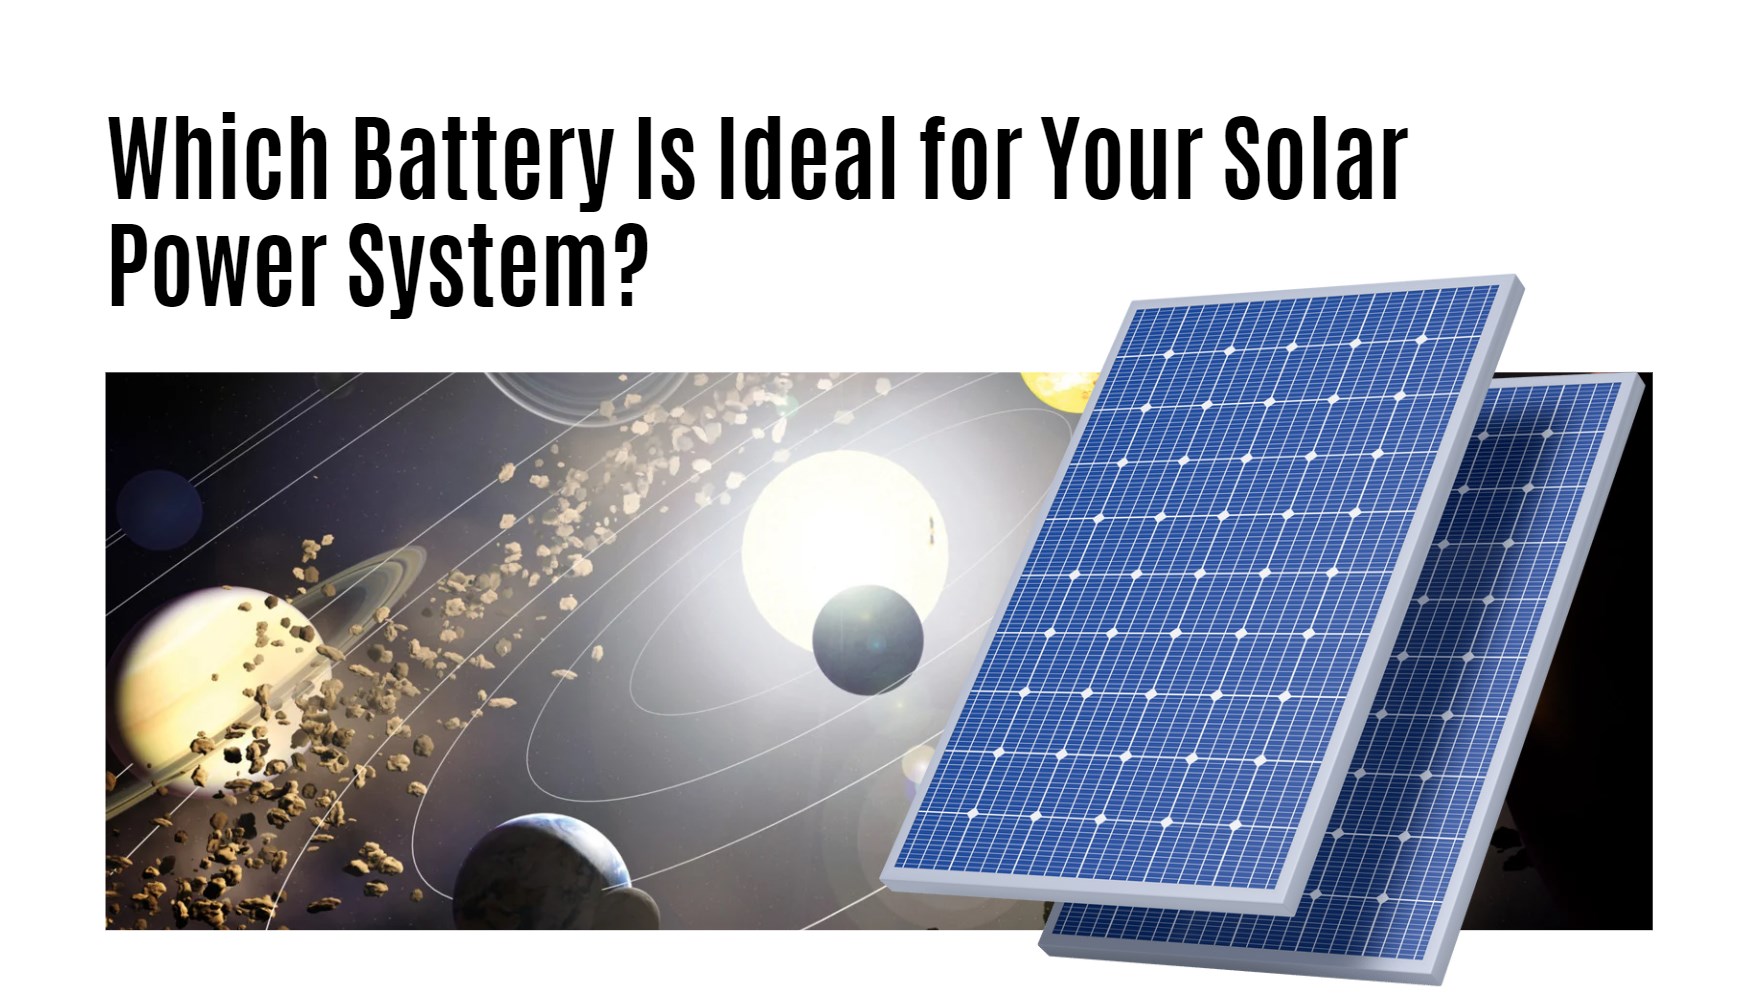 Which Battery Is Ideal for Your Solar Power System?